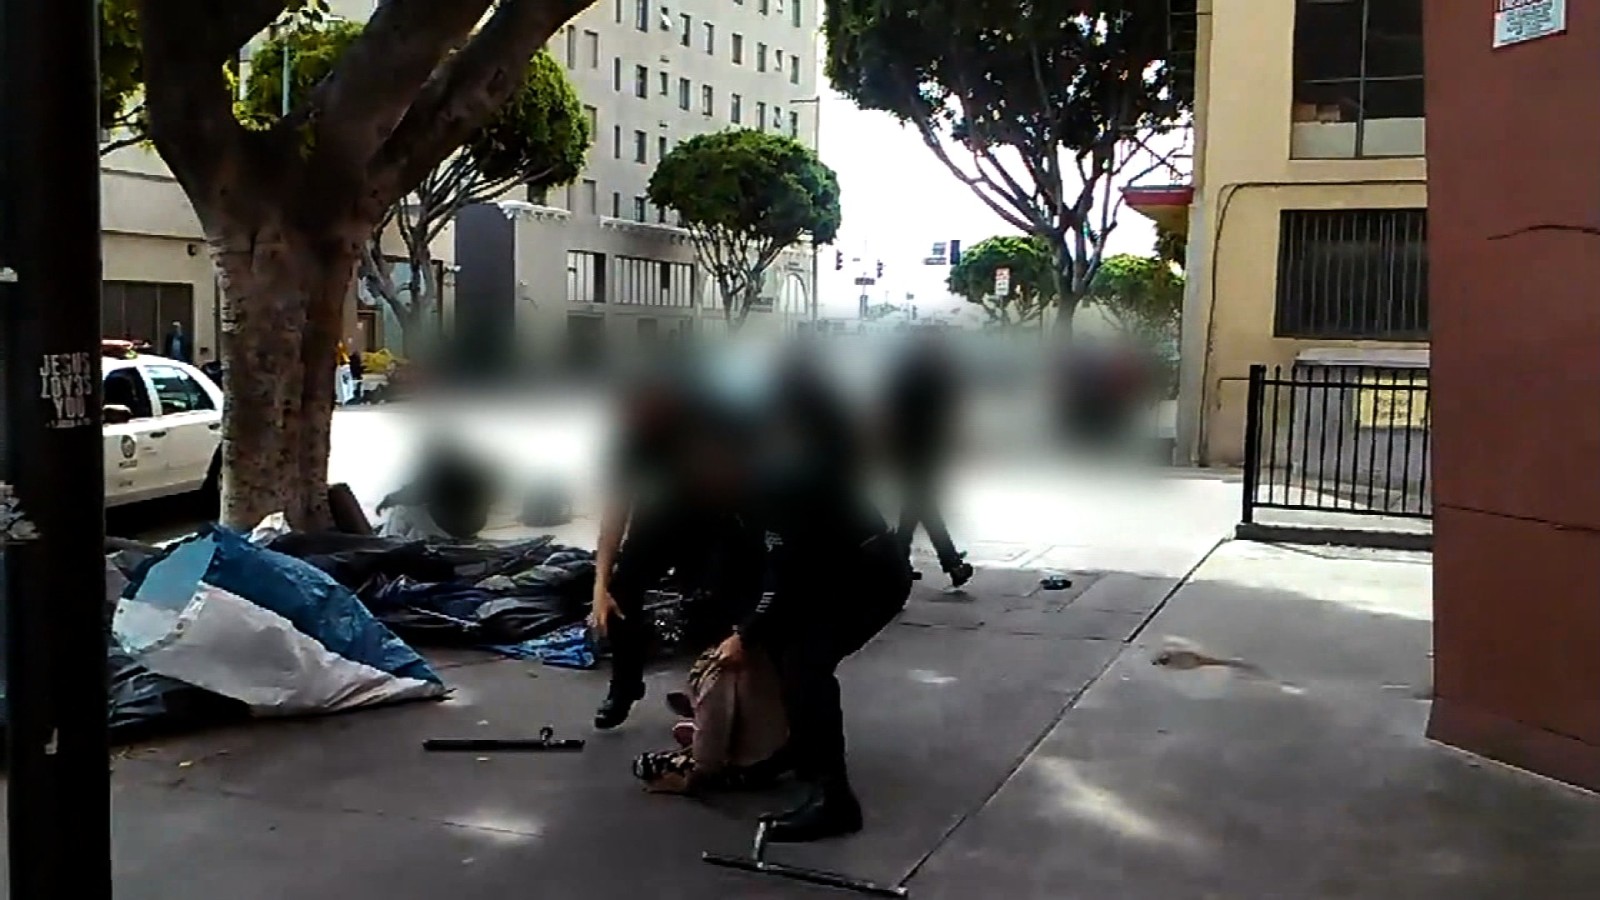 Lapd Fatal Shooting On Video Police Witness Disagree Cnn